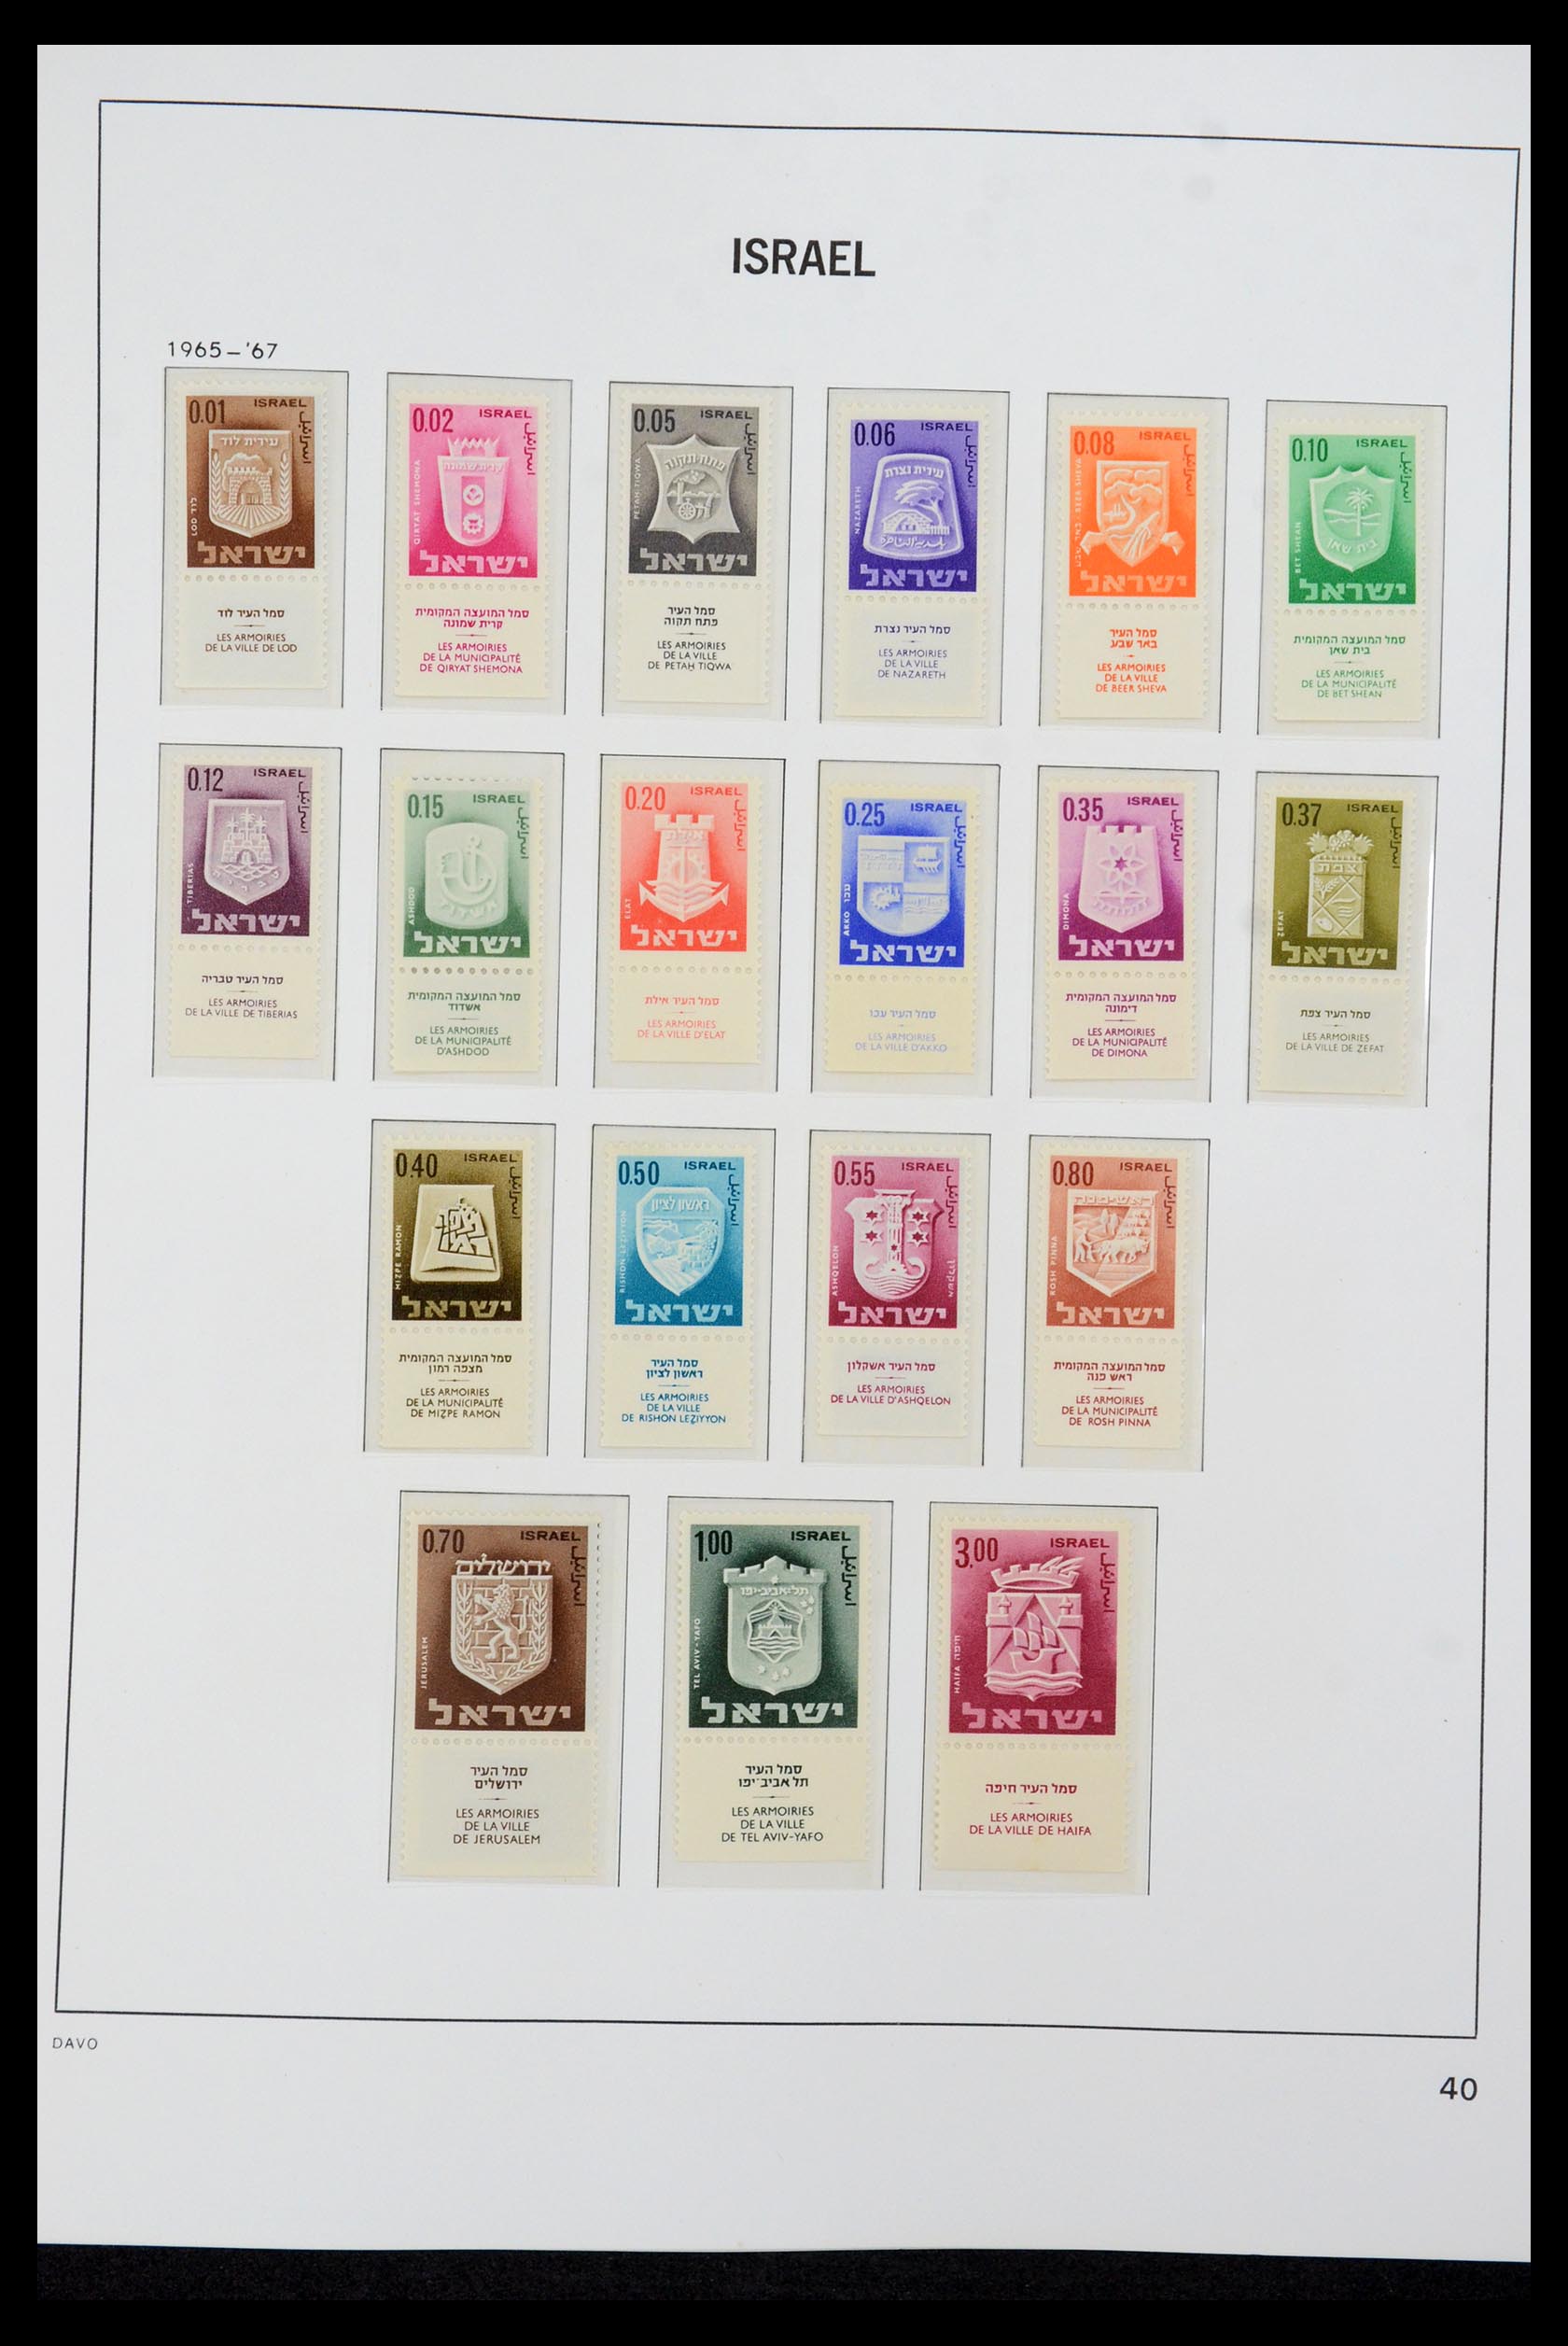 36264 052 - Stamp collection 36264 Israel 1949-2000.